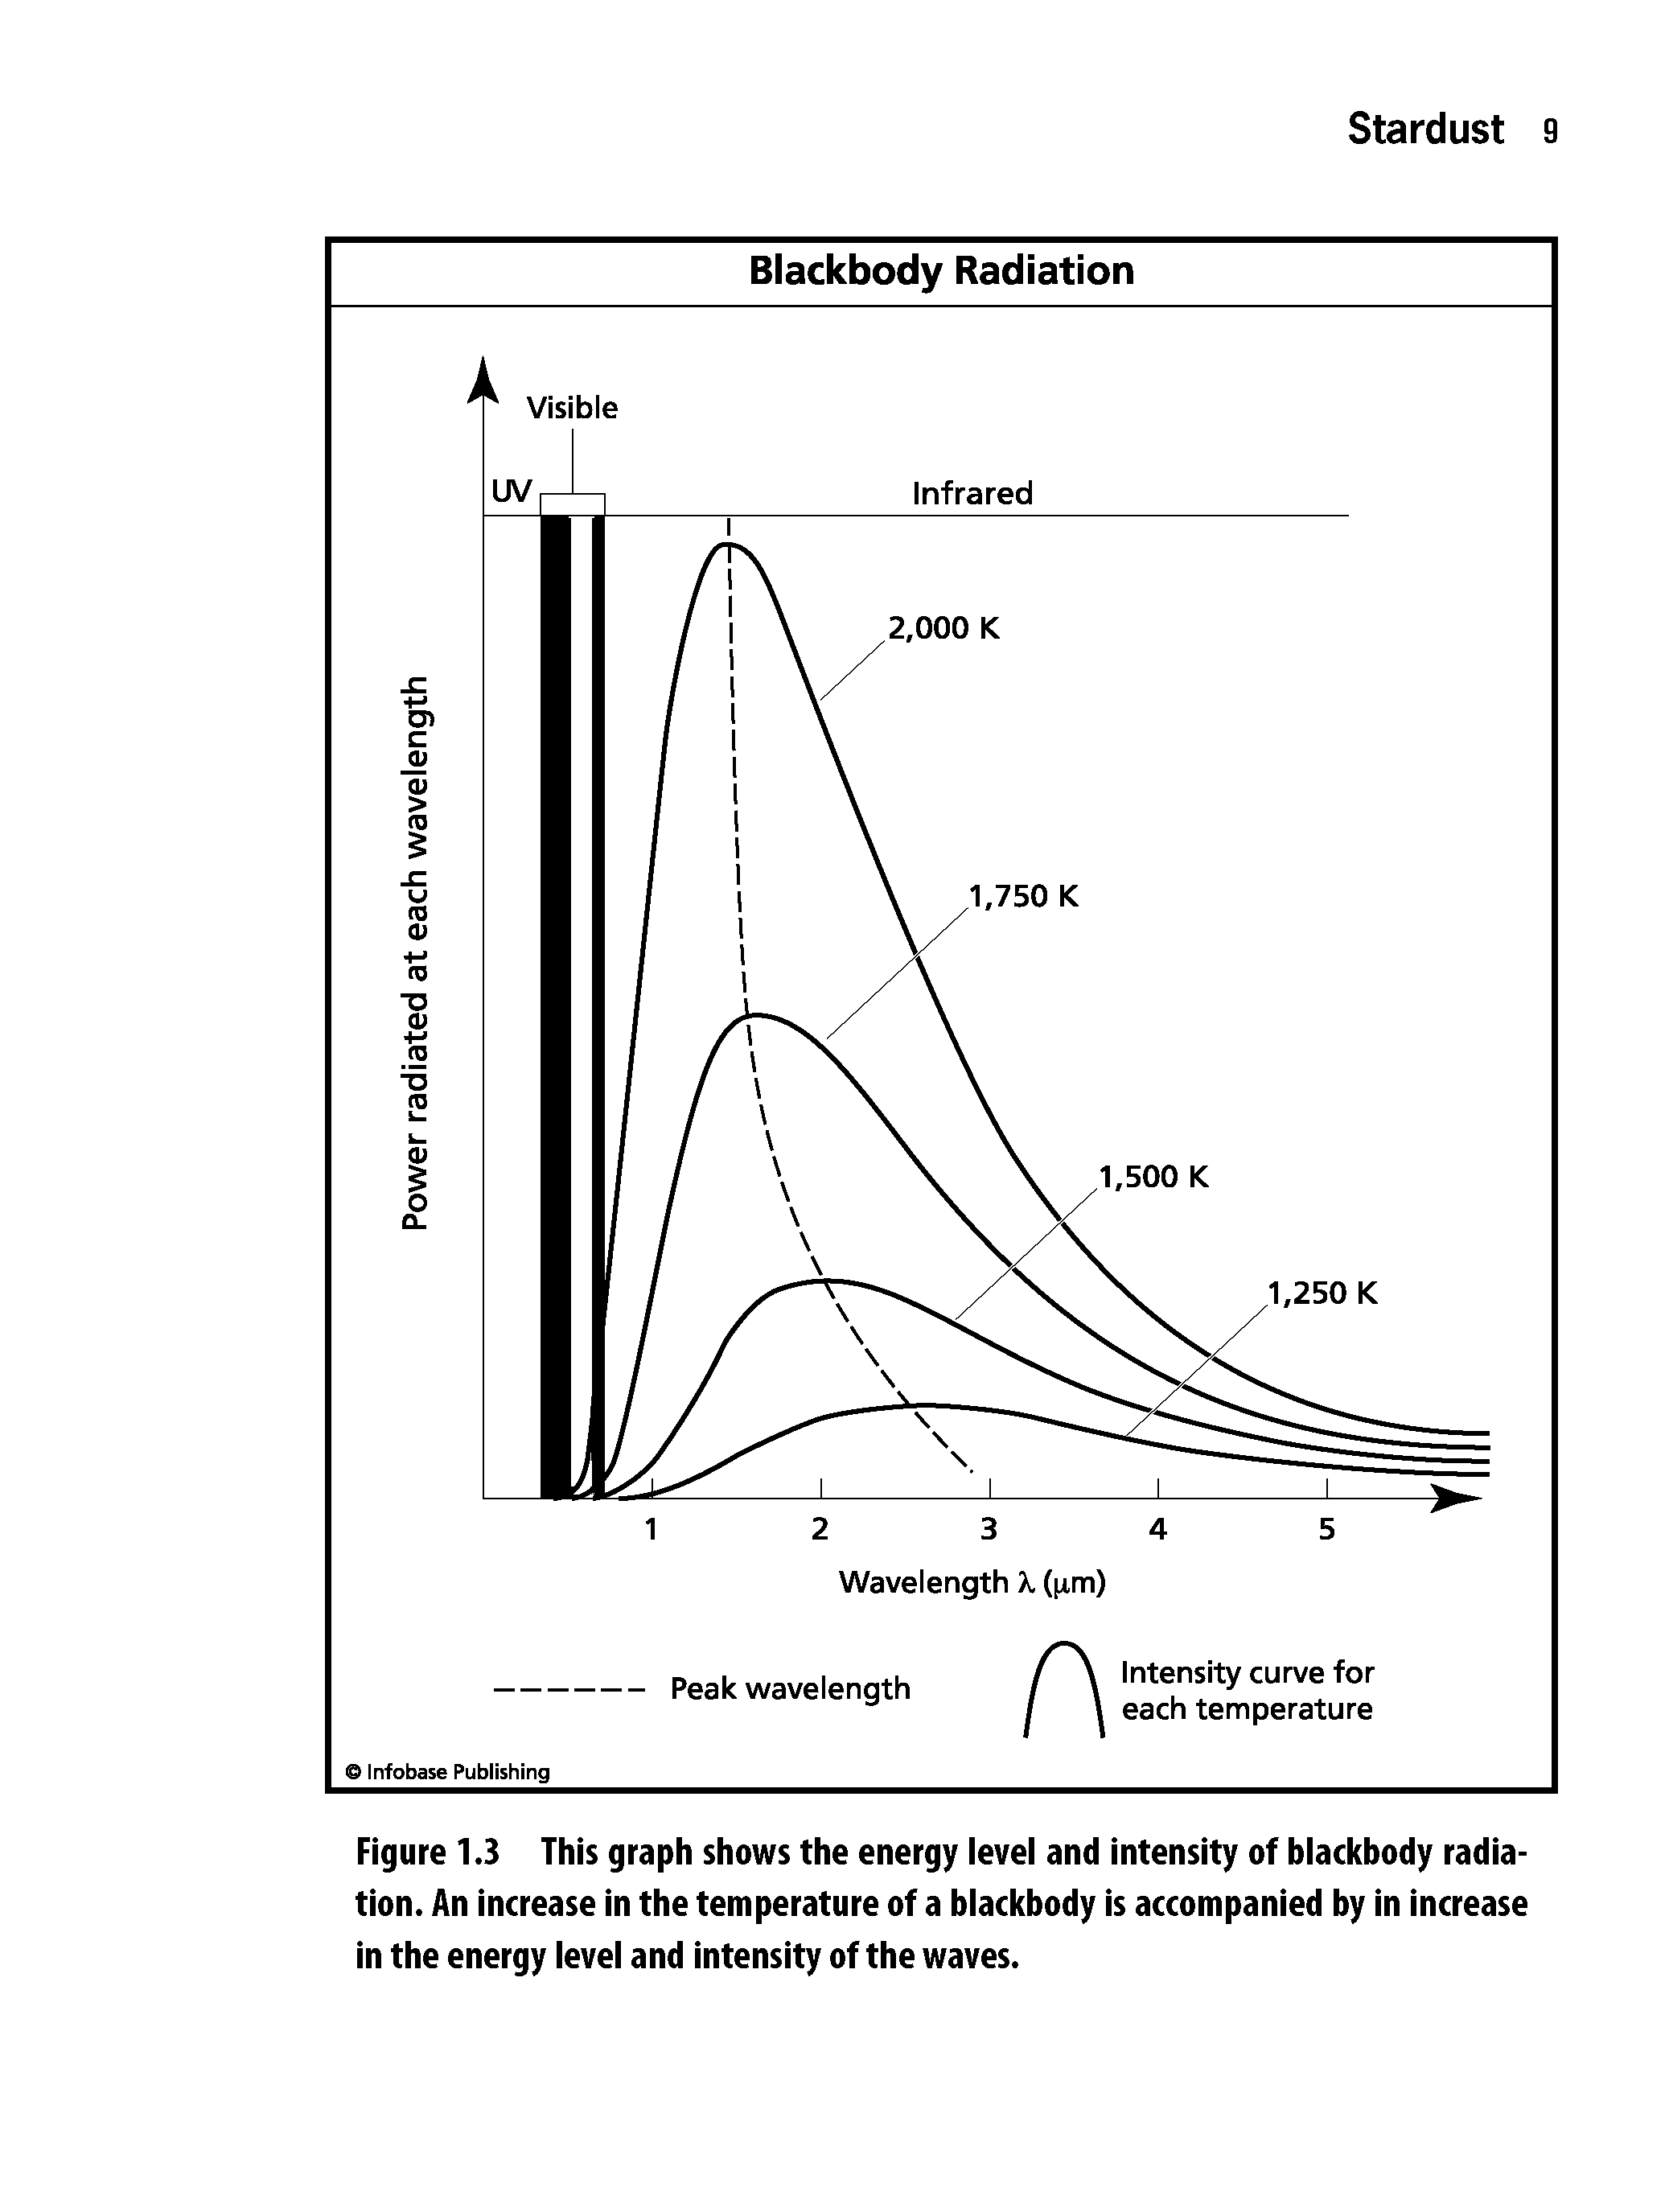 Figure 1.3 This graph shows the energy level and intensity of blackbody radiation. An increase in the temperature of a blackbody is accompanied by in increase in the energy level and intensity of the waves.